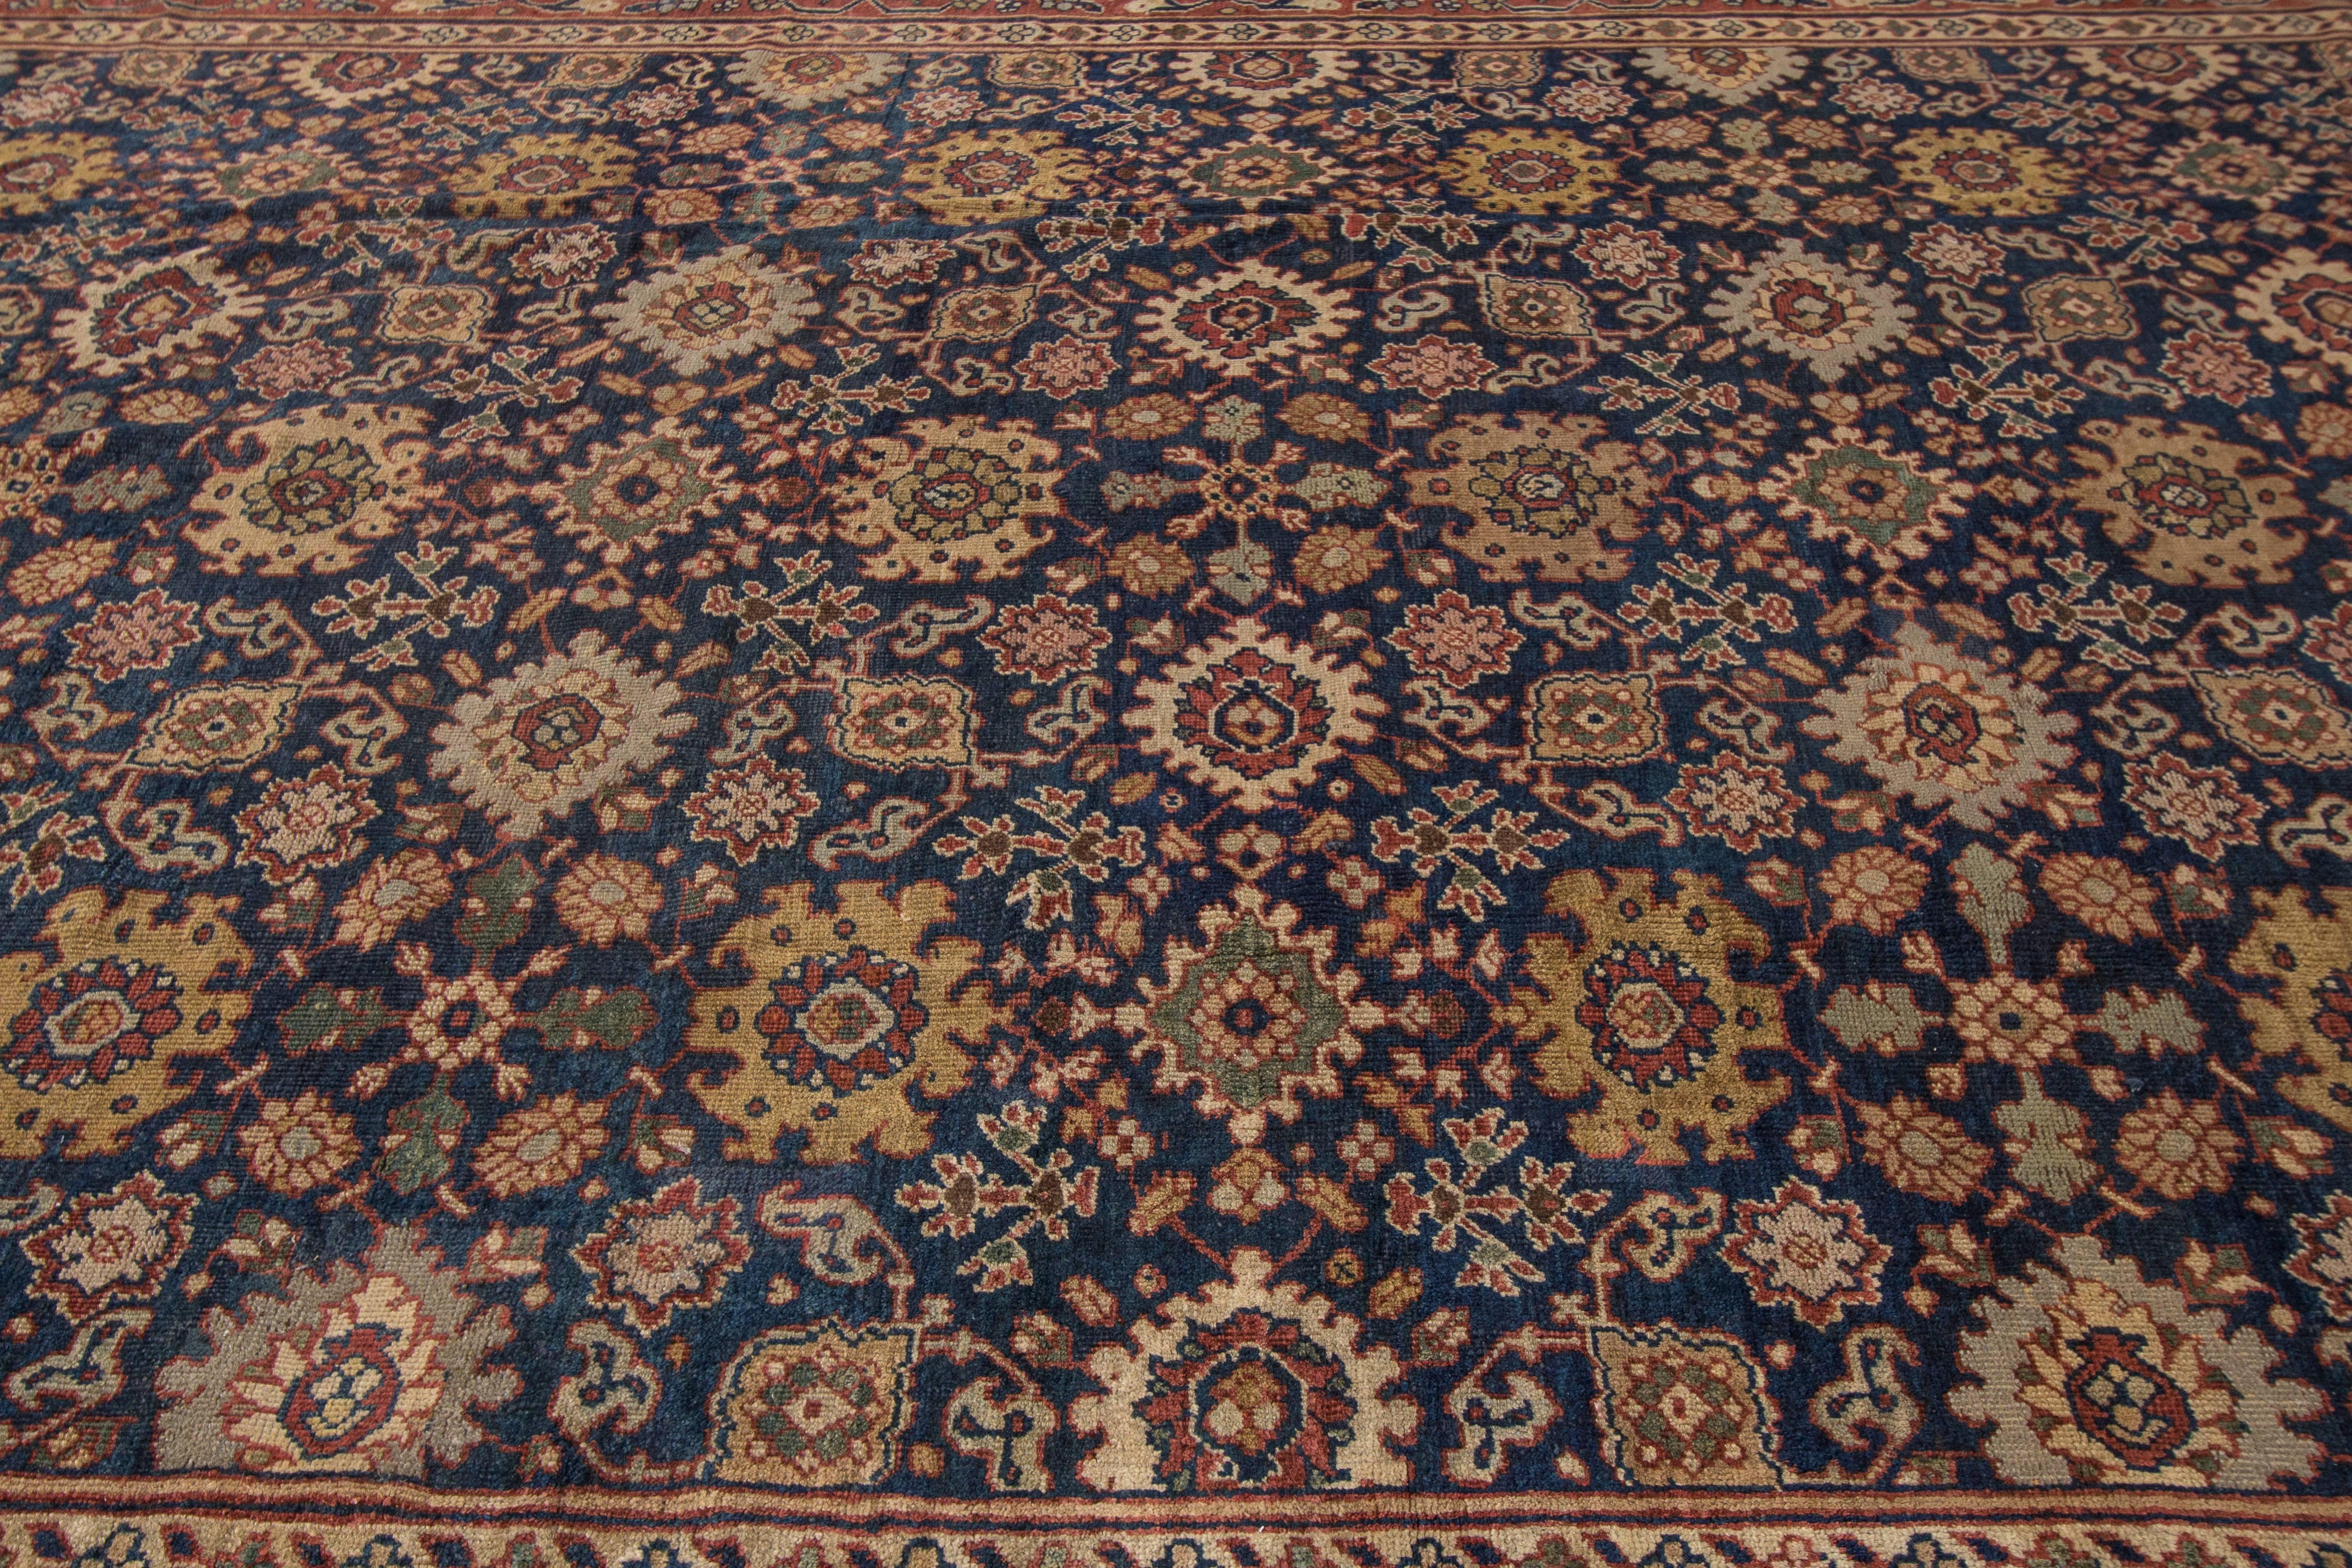 Measures: 11'.9 x 20'.9
This beautiful hand-knotted design rug will make your floor look splendid. This collection is made in wool.